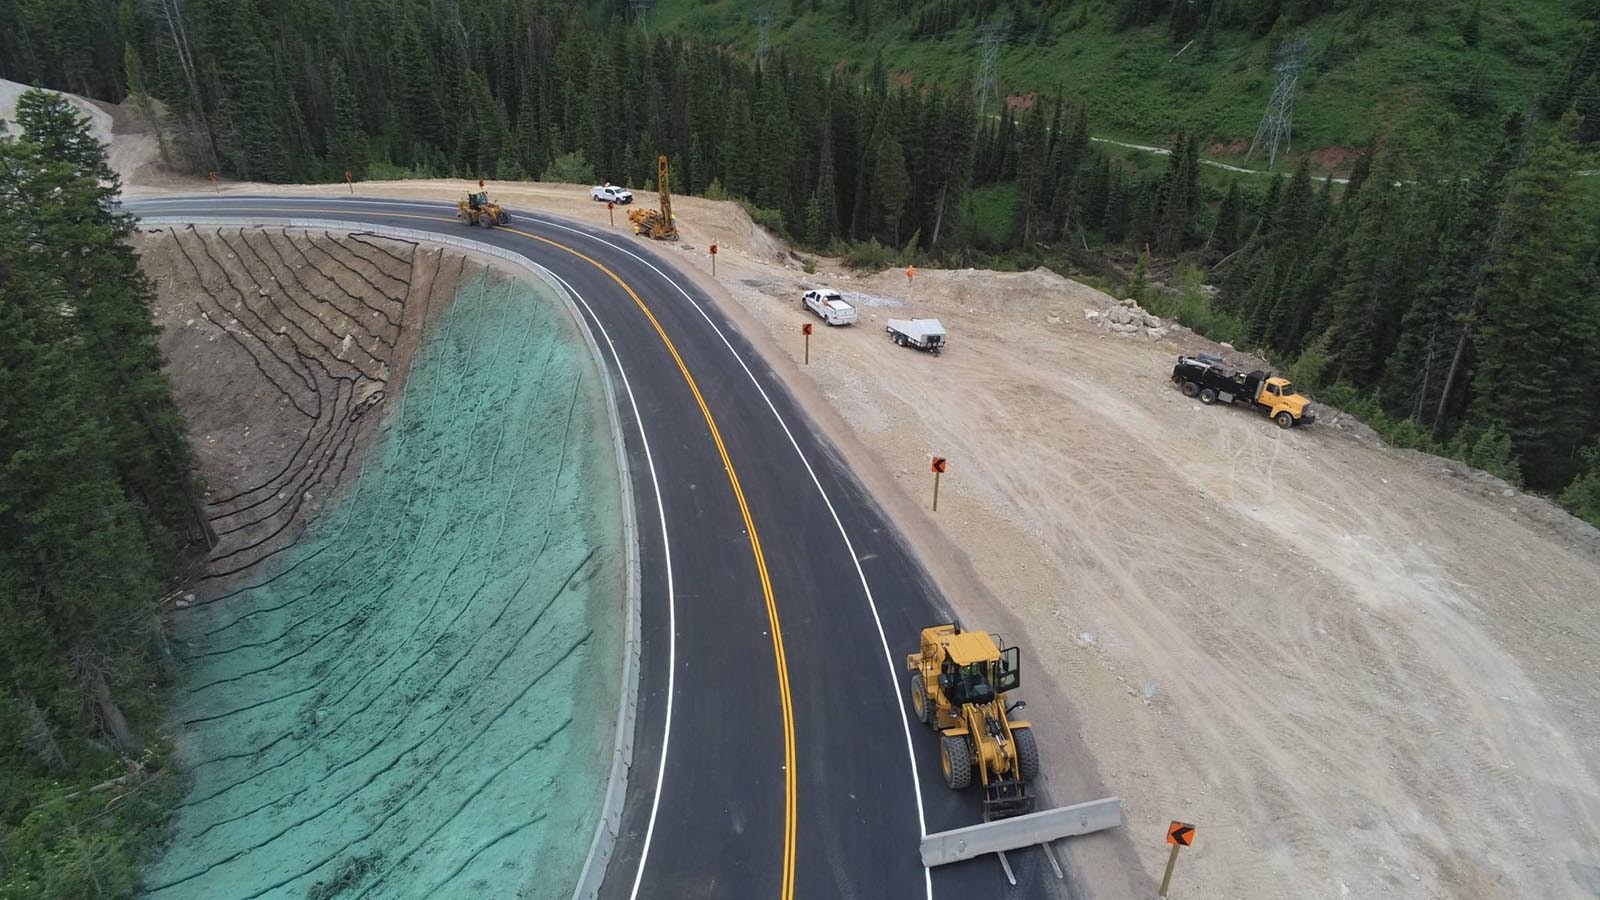 A Teton Pass bypass fix works for now, but engineers say it is not the long-term solution.